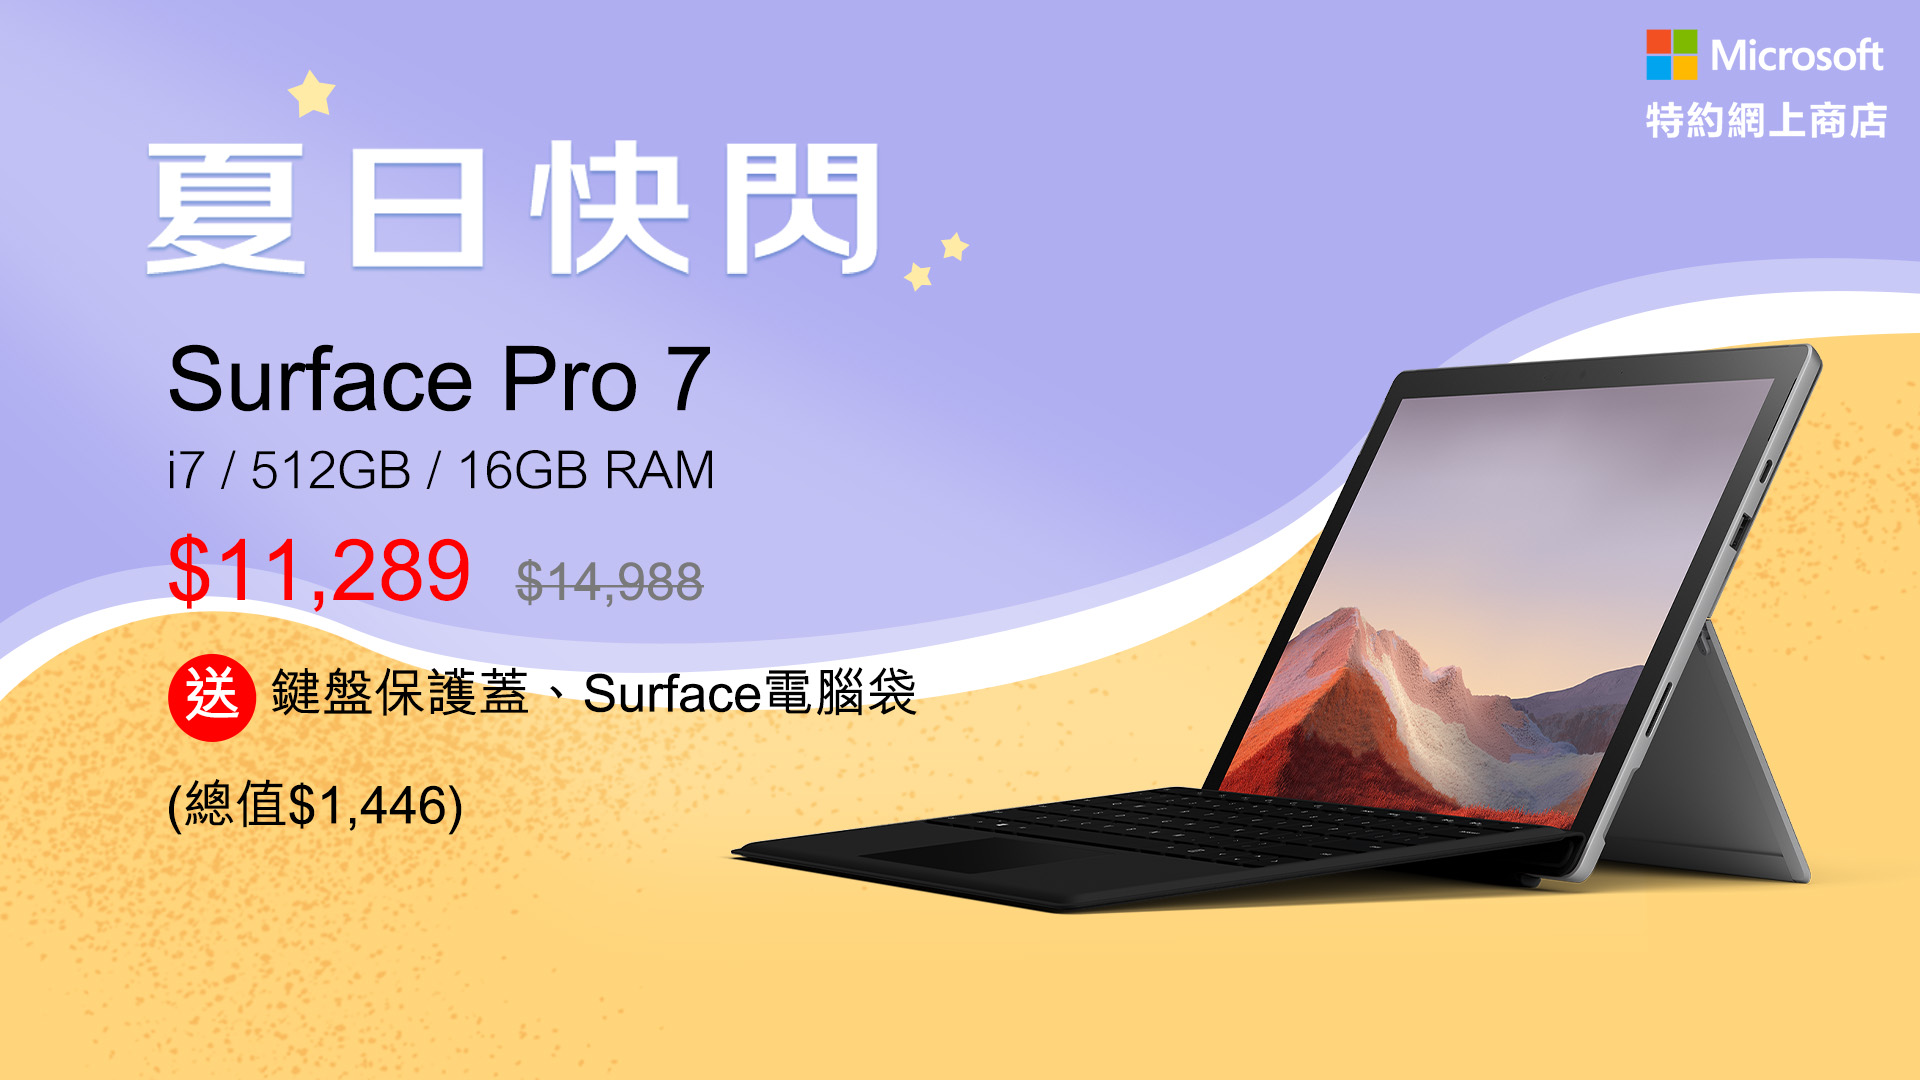 Up to HK$3,000 off Surface Pro 7 plus free accessories